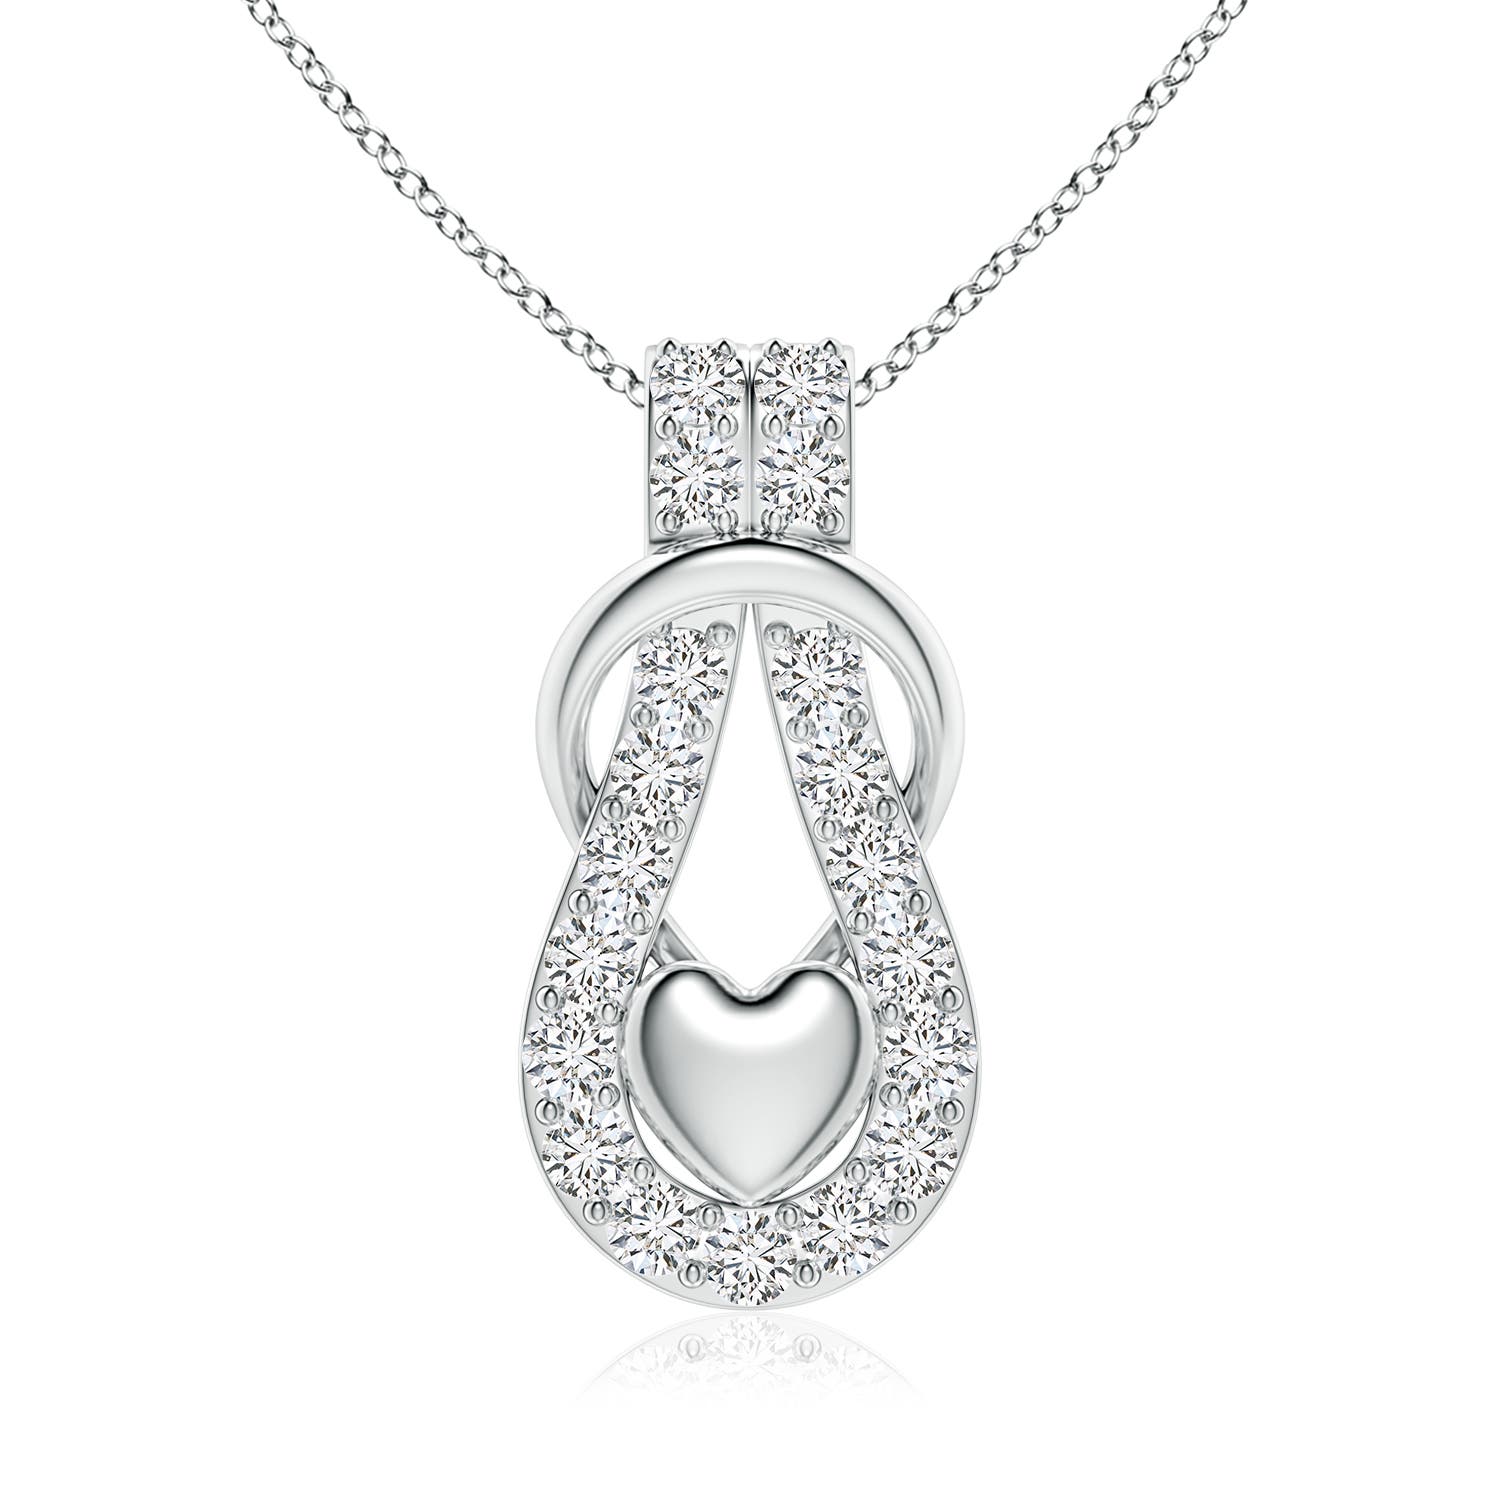 H, SI2 / 3.02 CT / 18 KT White Gold